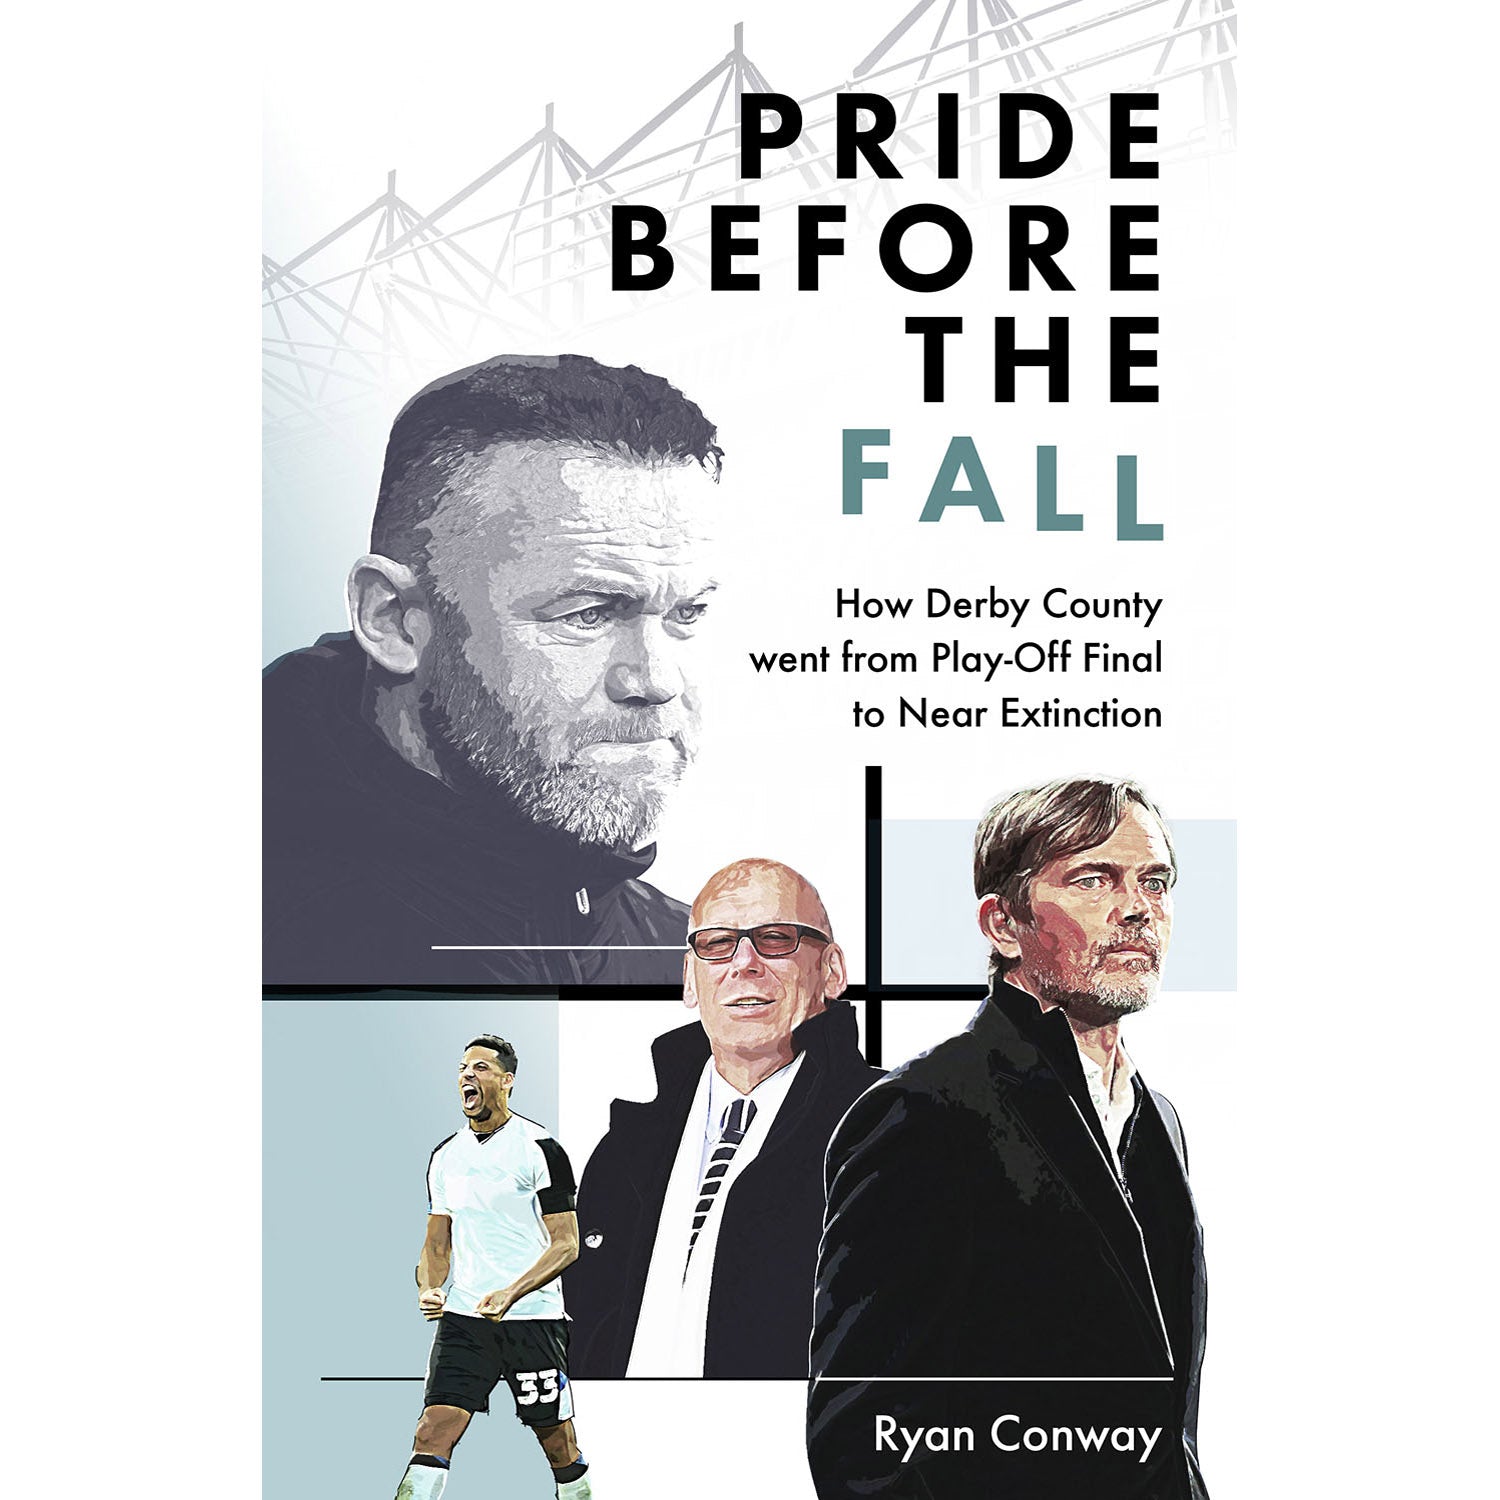 Pride Before the Fall – How Derby County went from Play-off Final to Near Extinction